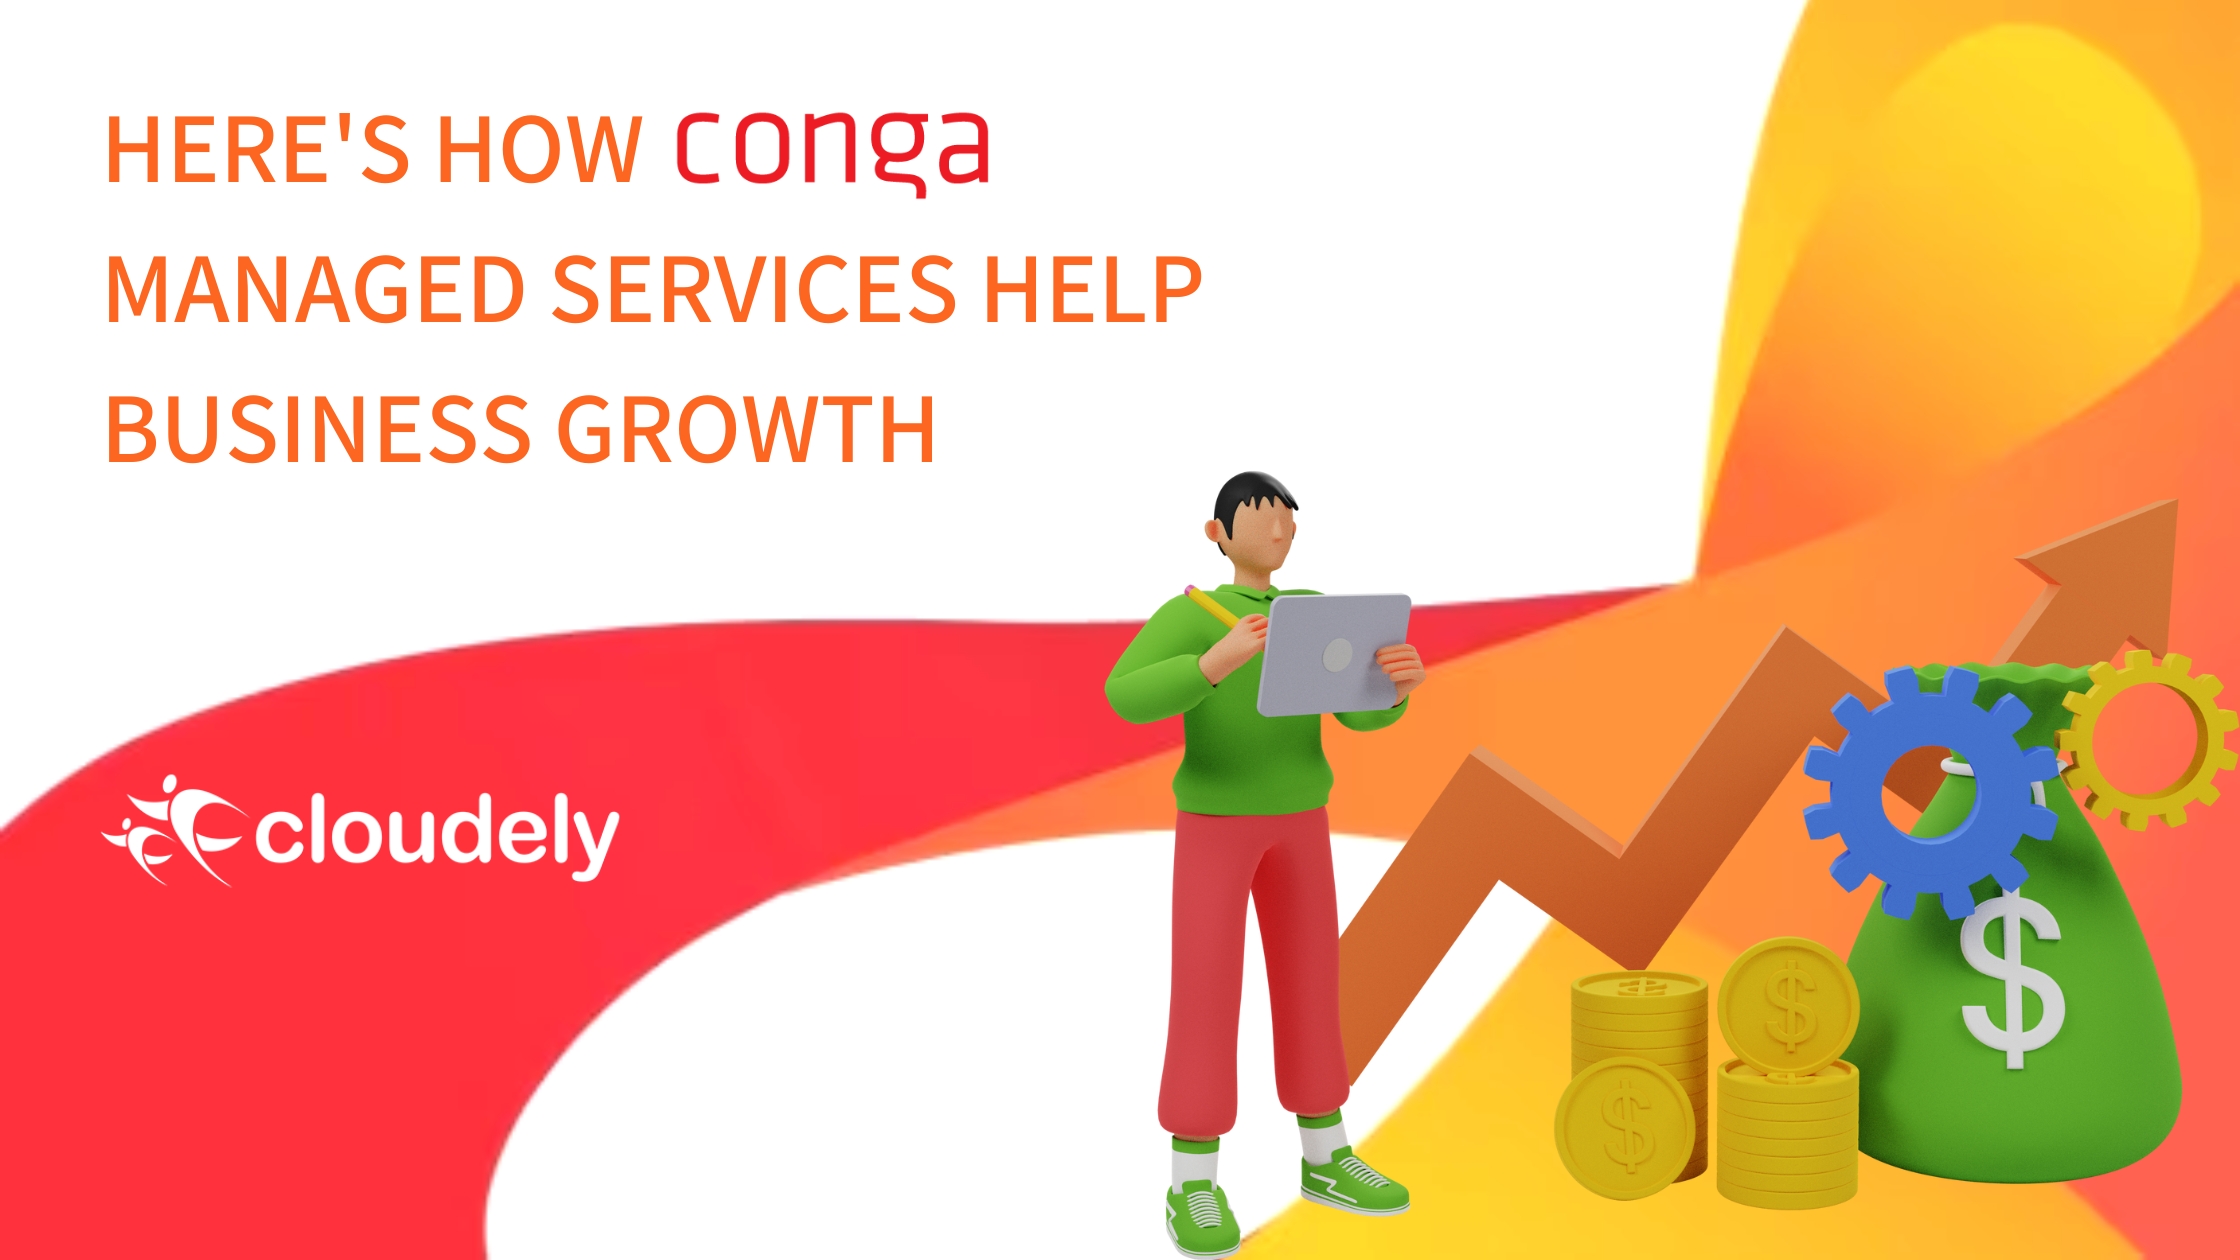 Conga Managed Services